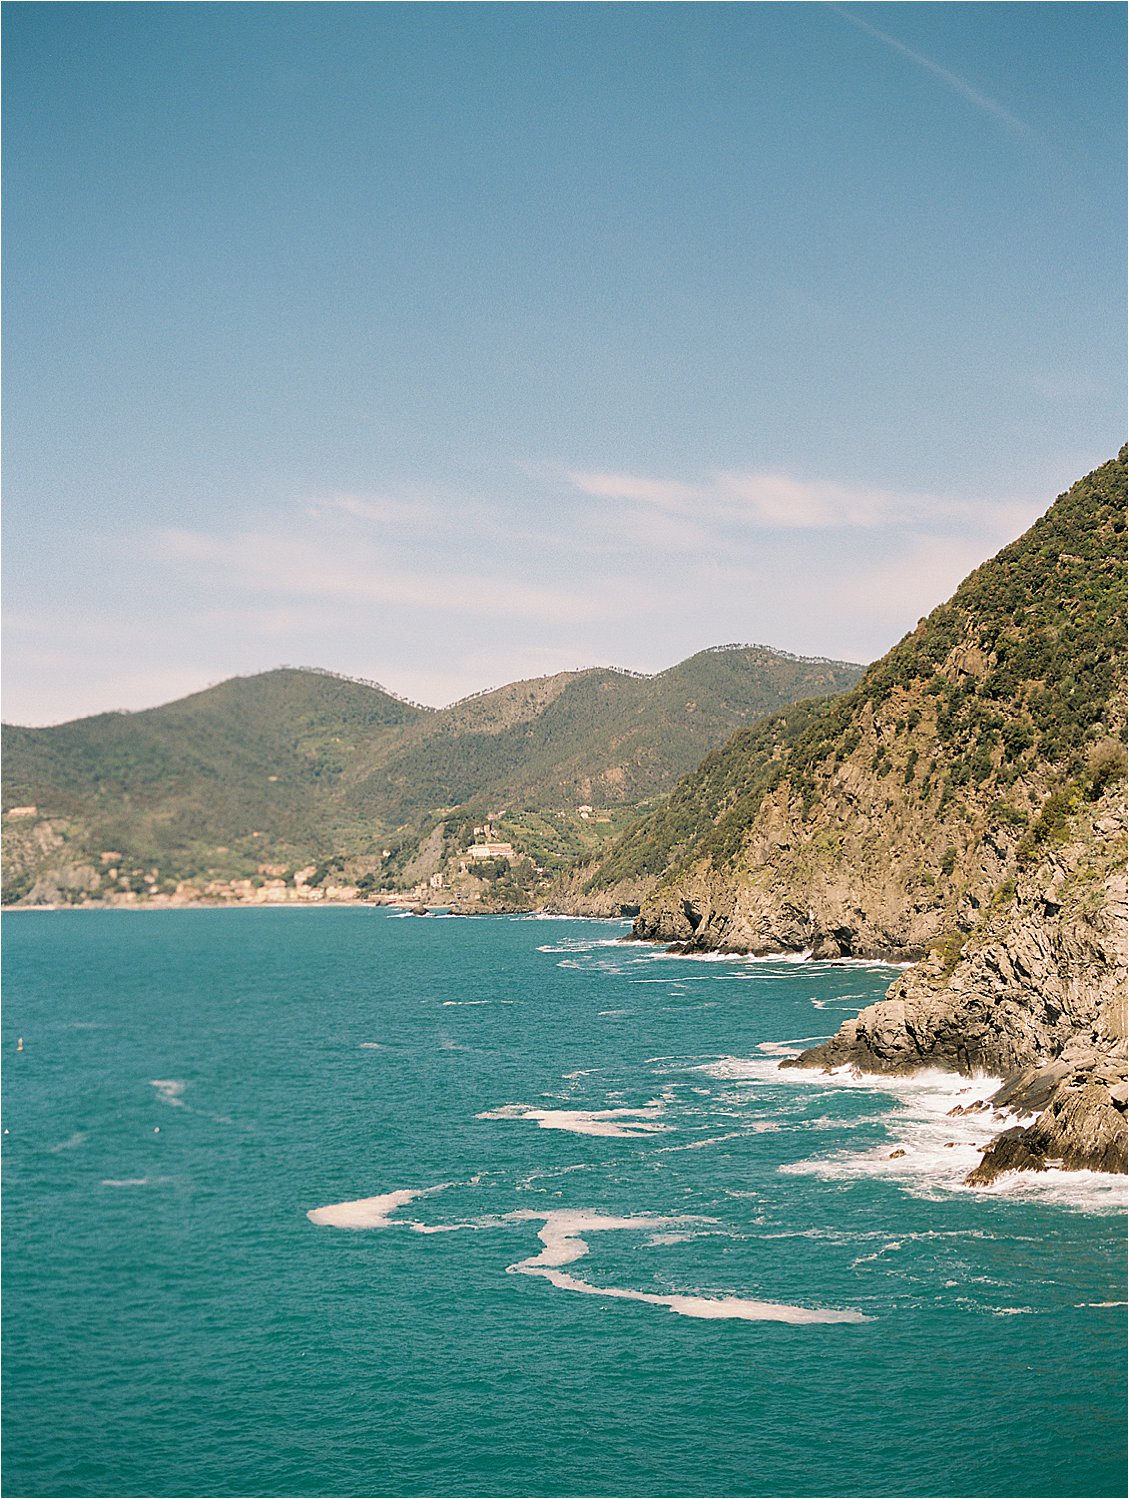 Coast of Cinque Terre, Italy on film with destination wedding film photographer Renee Hollingshead